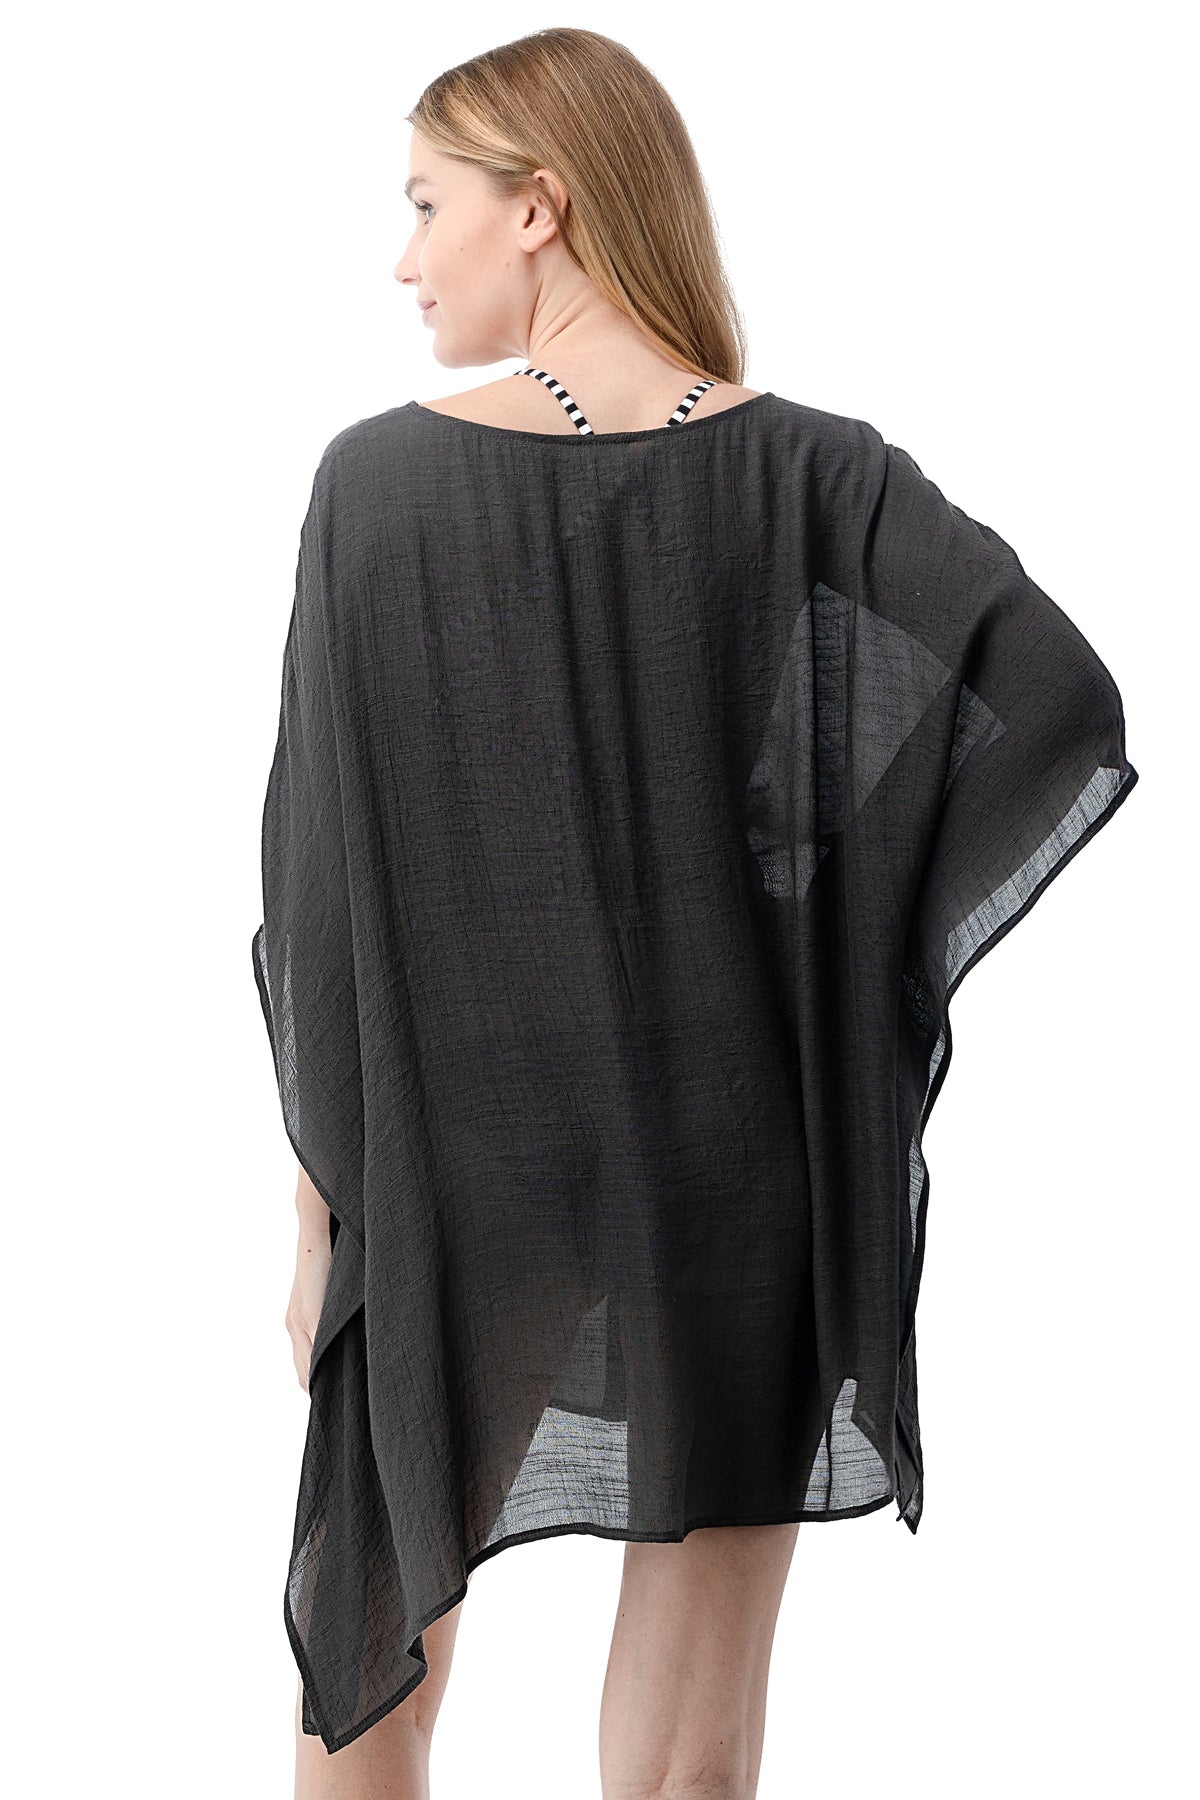 EDGY Land Girl's and Women's Round Neck Poncho Mini Dress with Waist Tie